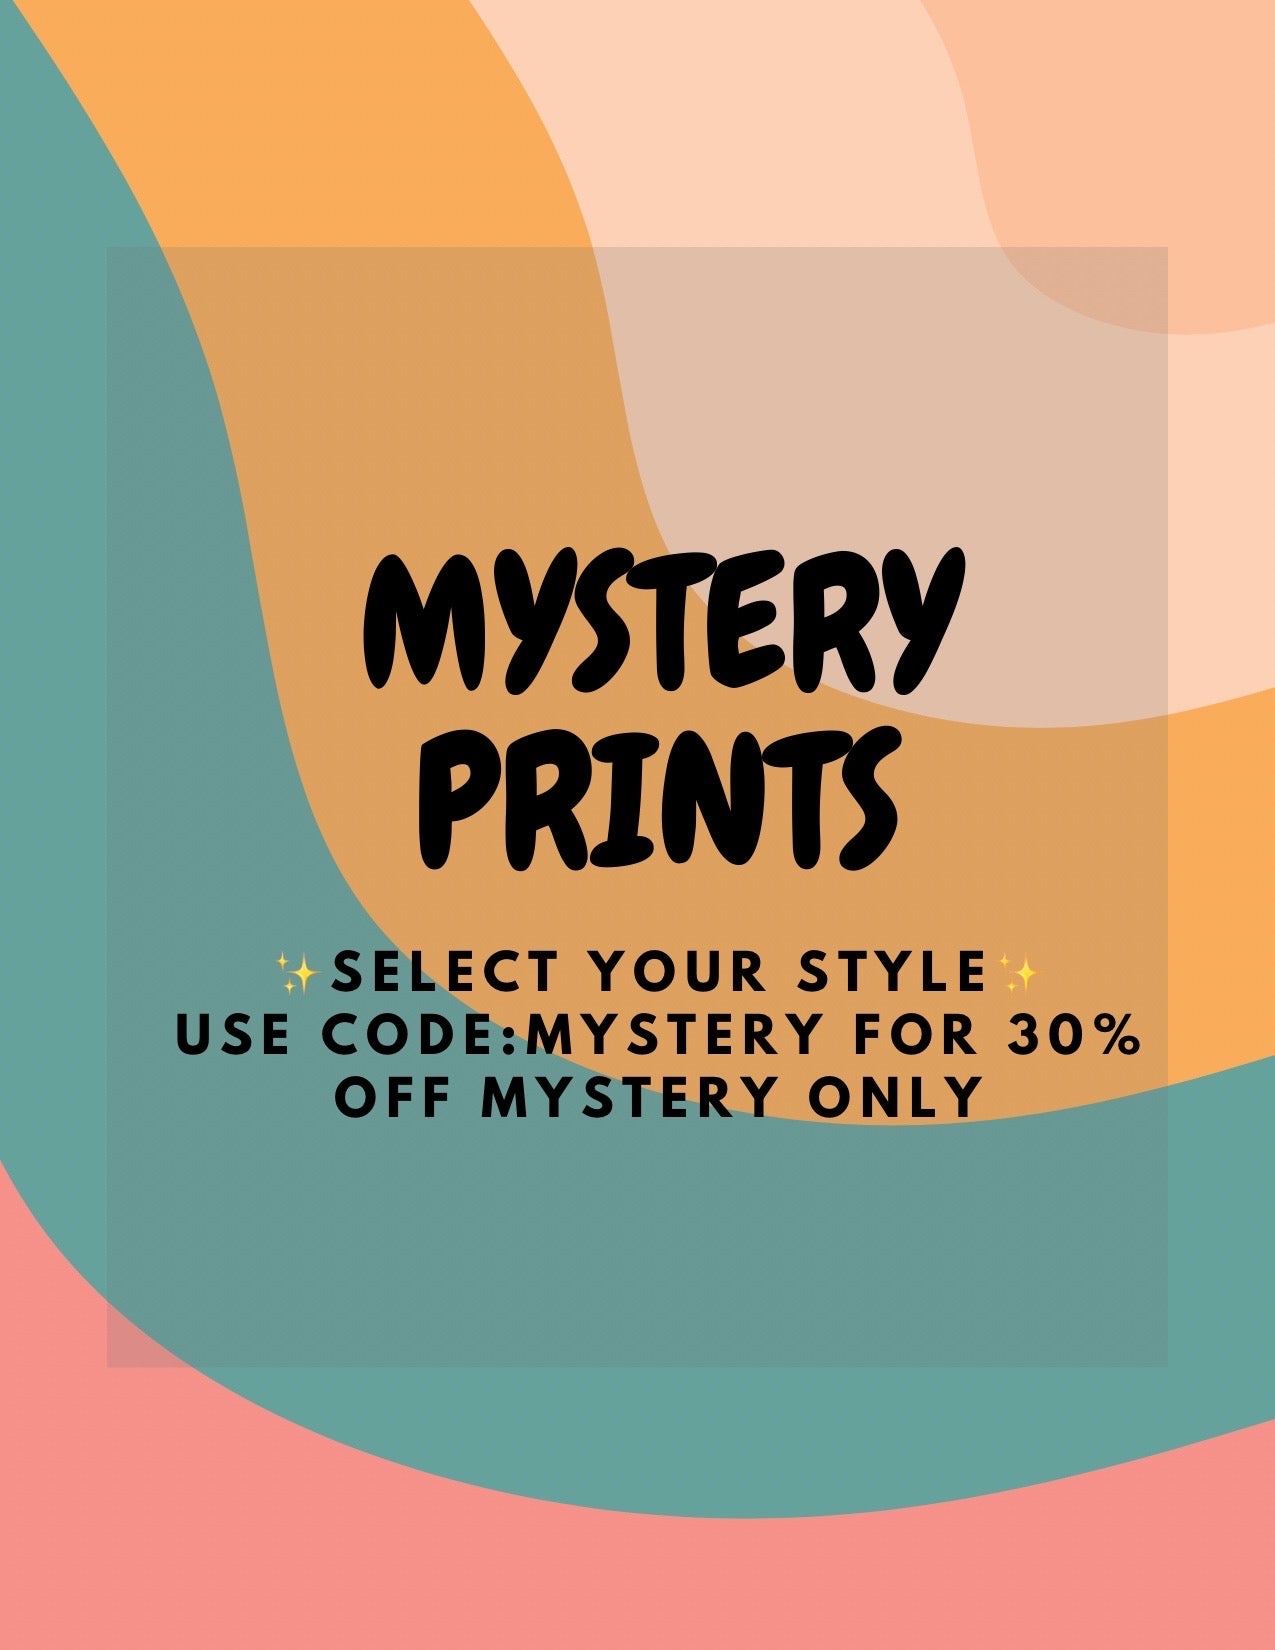 Pick Your Style - Discounted Mystery